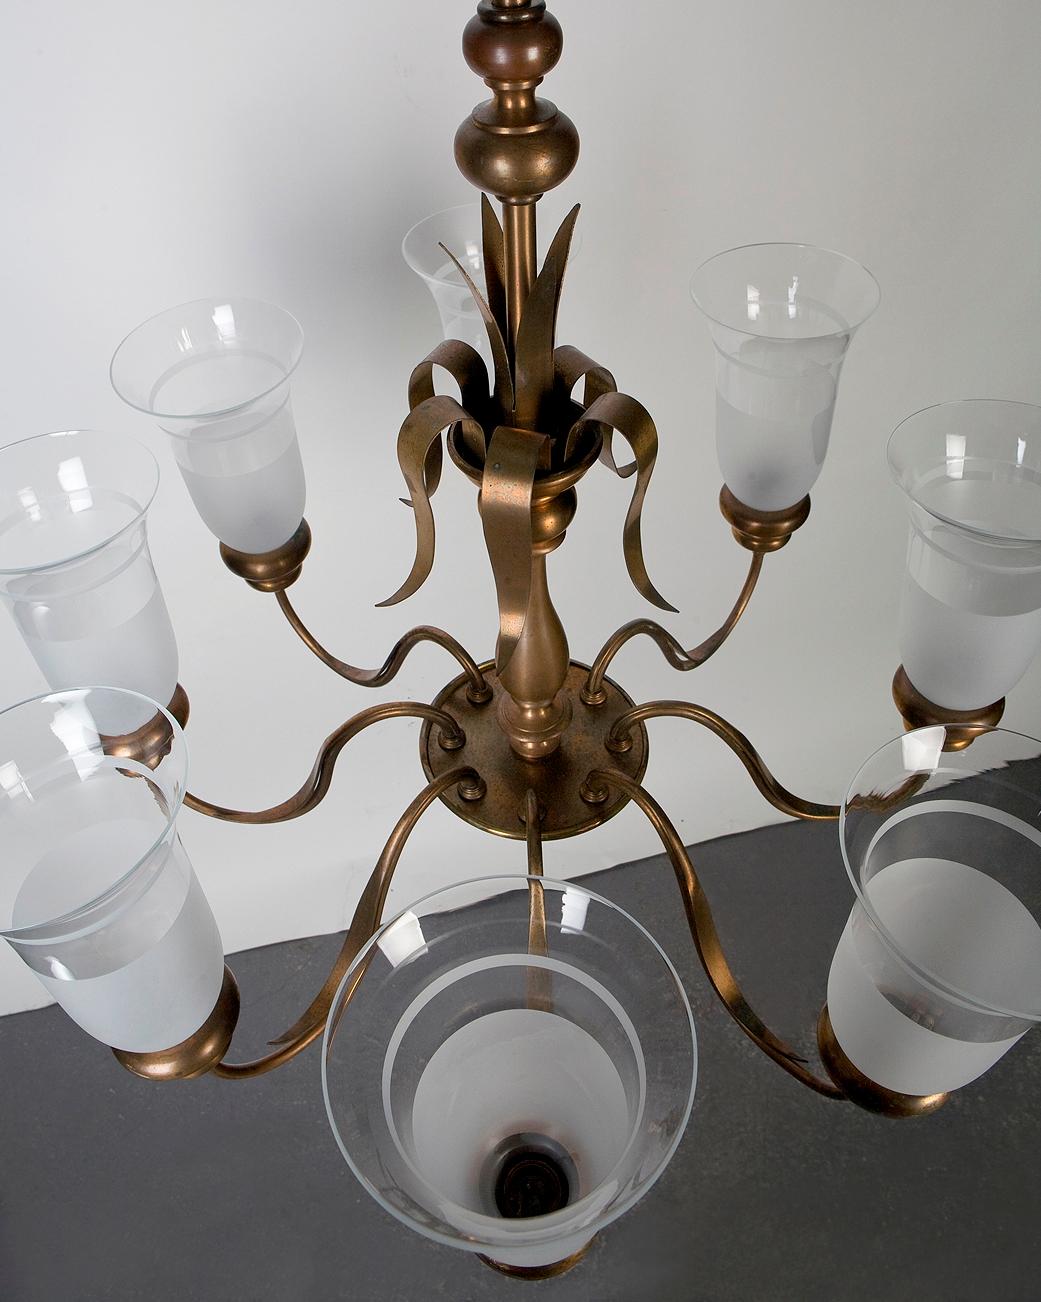 Mid-20th Century E. F. Caldwell Brass Chandelier with Frosted Hurricane Glass Shades, Circa 1940s For Sale